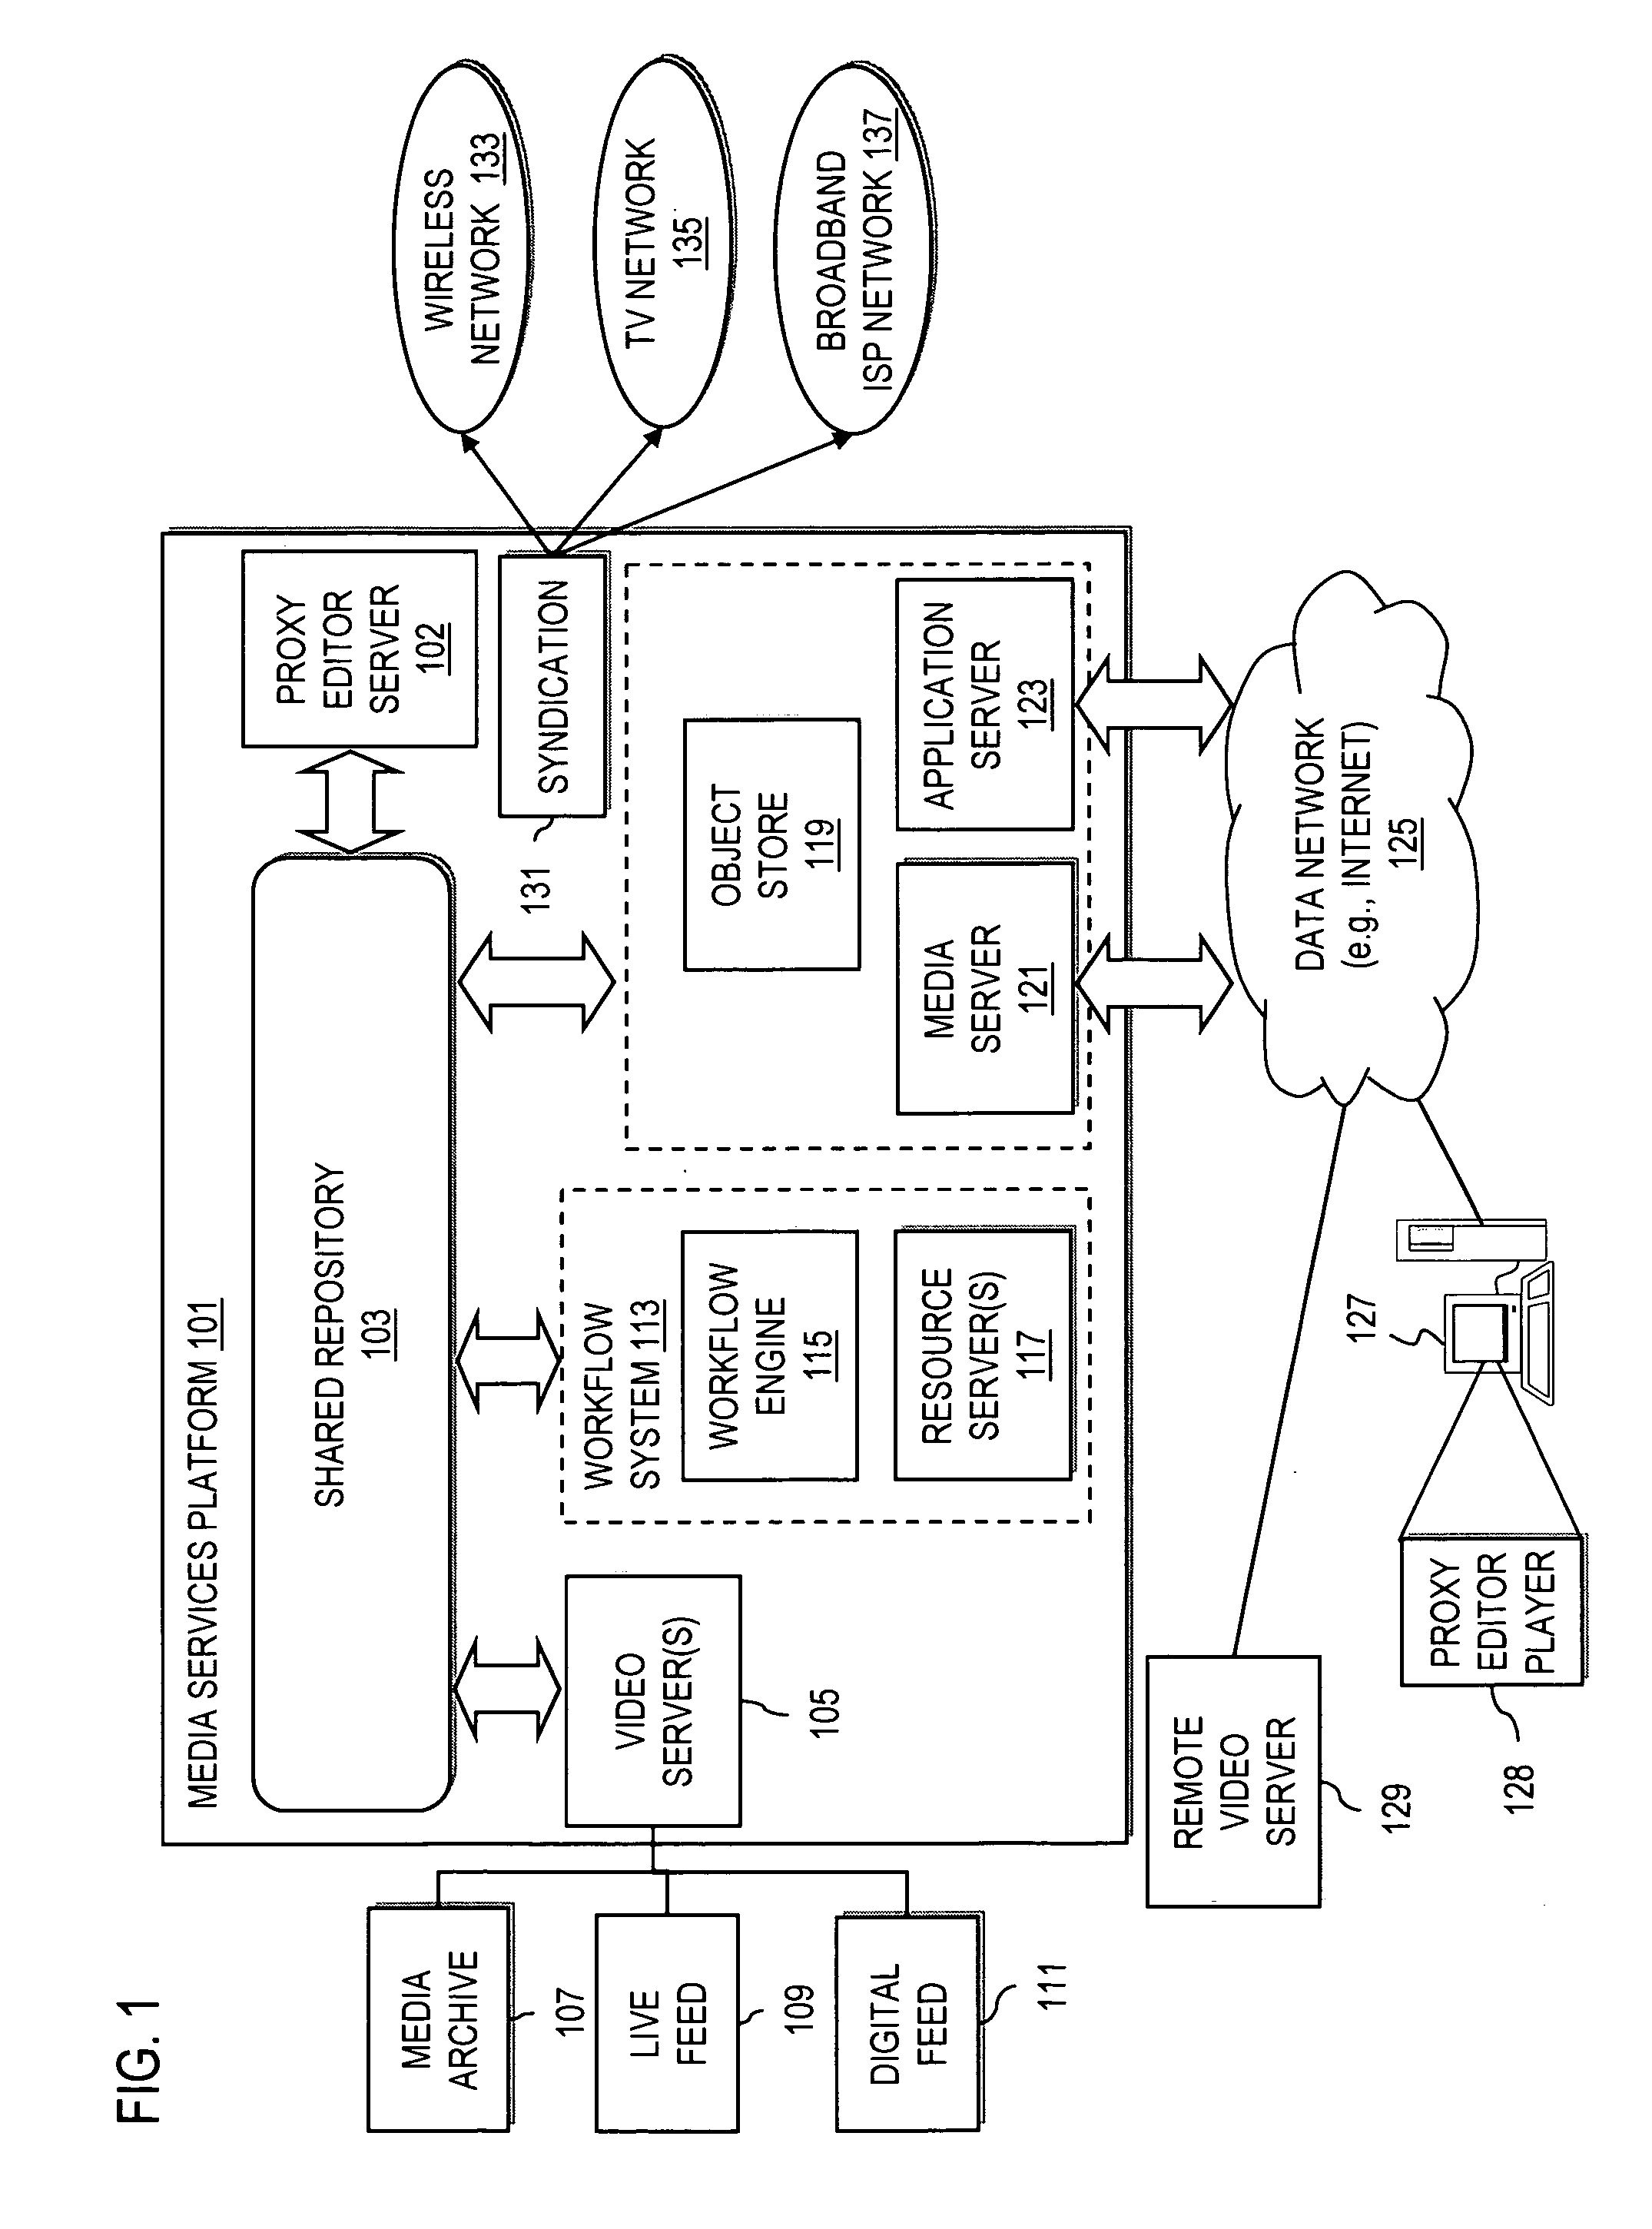 Method and system for providing remote digital media ingest with centralized editorial control